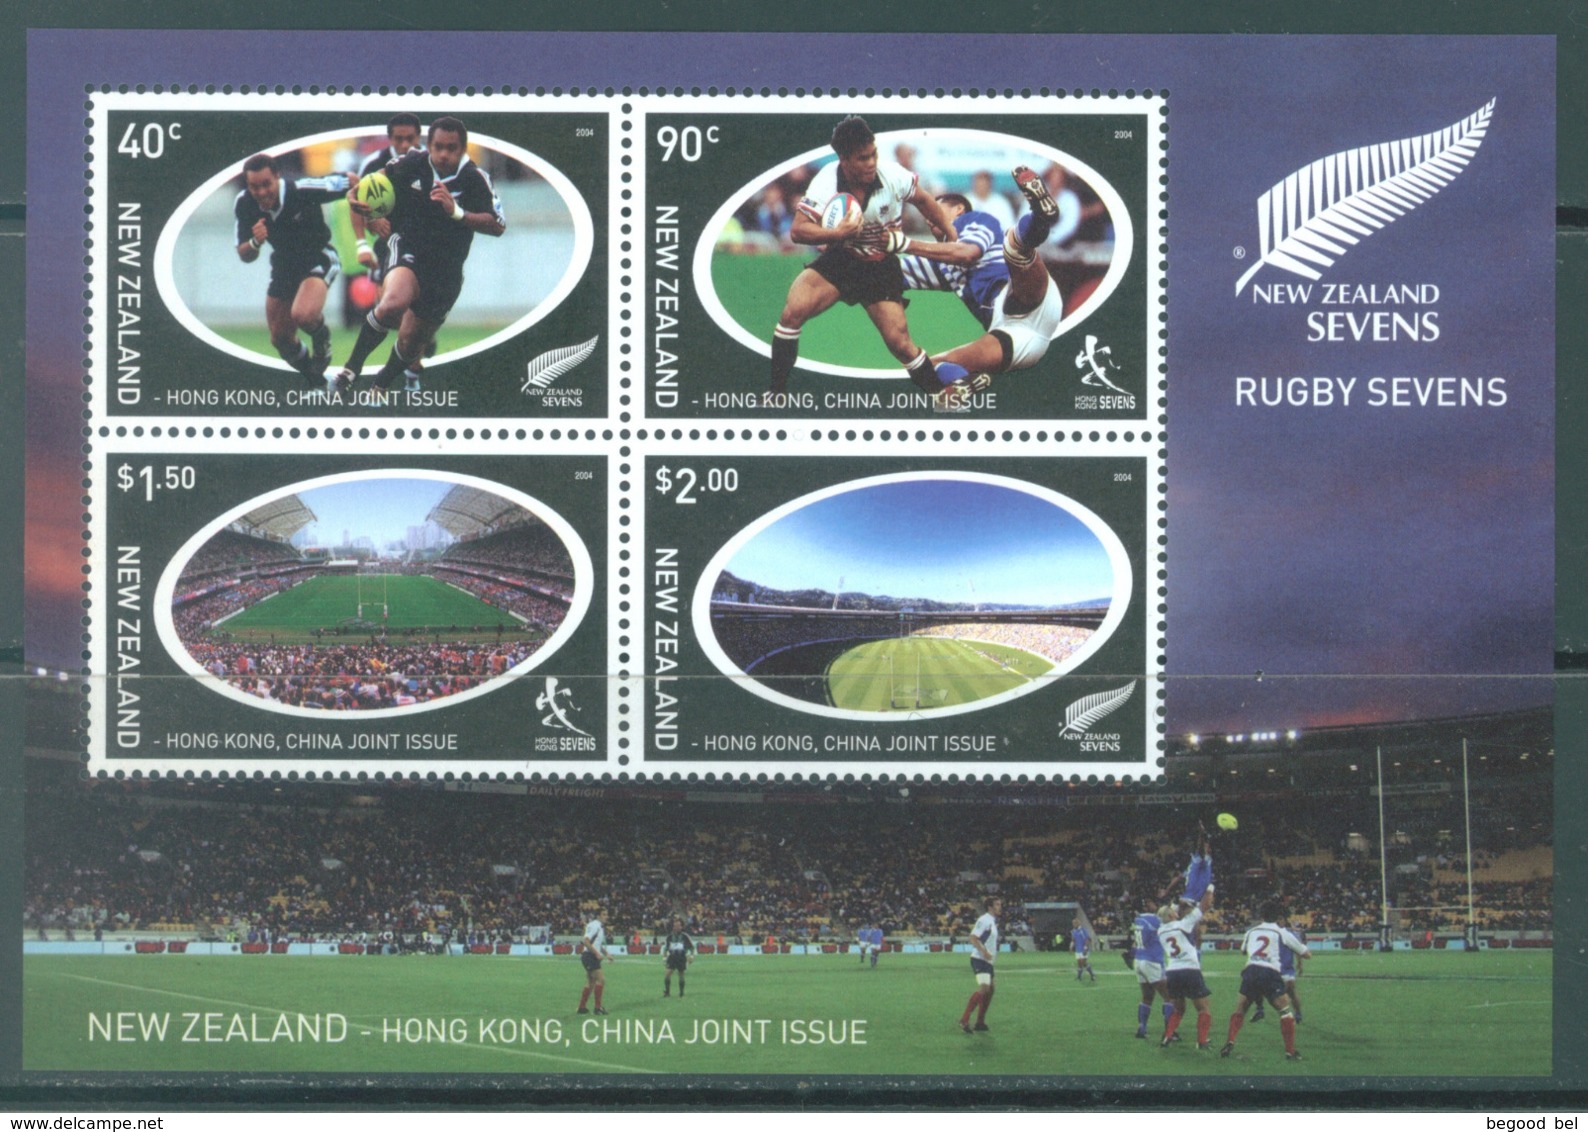 NEW ZEALAND - MNH/** - 2004 - SPORT RUGBY SEVENS - Yv BLOC 185 -  Lot 20702 - Hojas Bloque